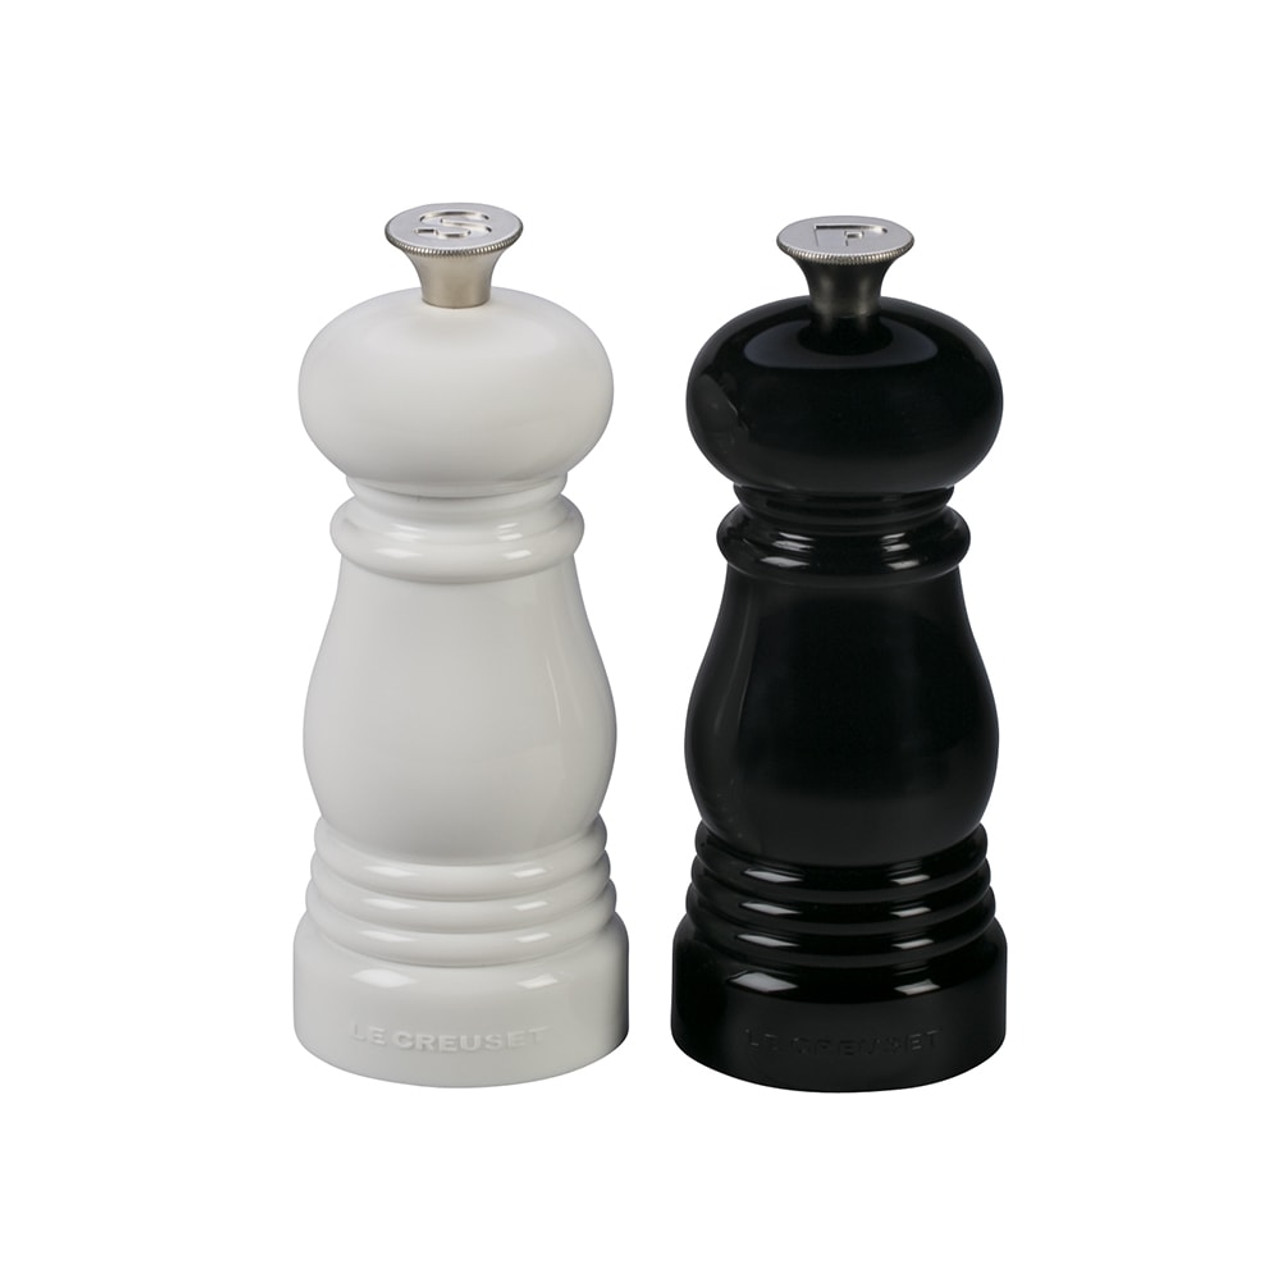 https://cdn11.bigcommerce.com/s-hccytny0od/images/stencil/1280x1280/products/3687/13272/le-creuset-petite-salt-and-pepper-mill-set-black-white__29120.1603922532.jpg?c=2?imbypass=on